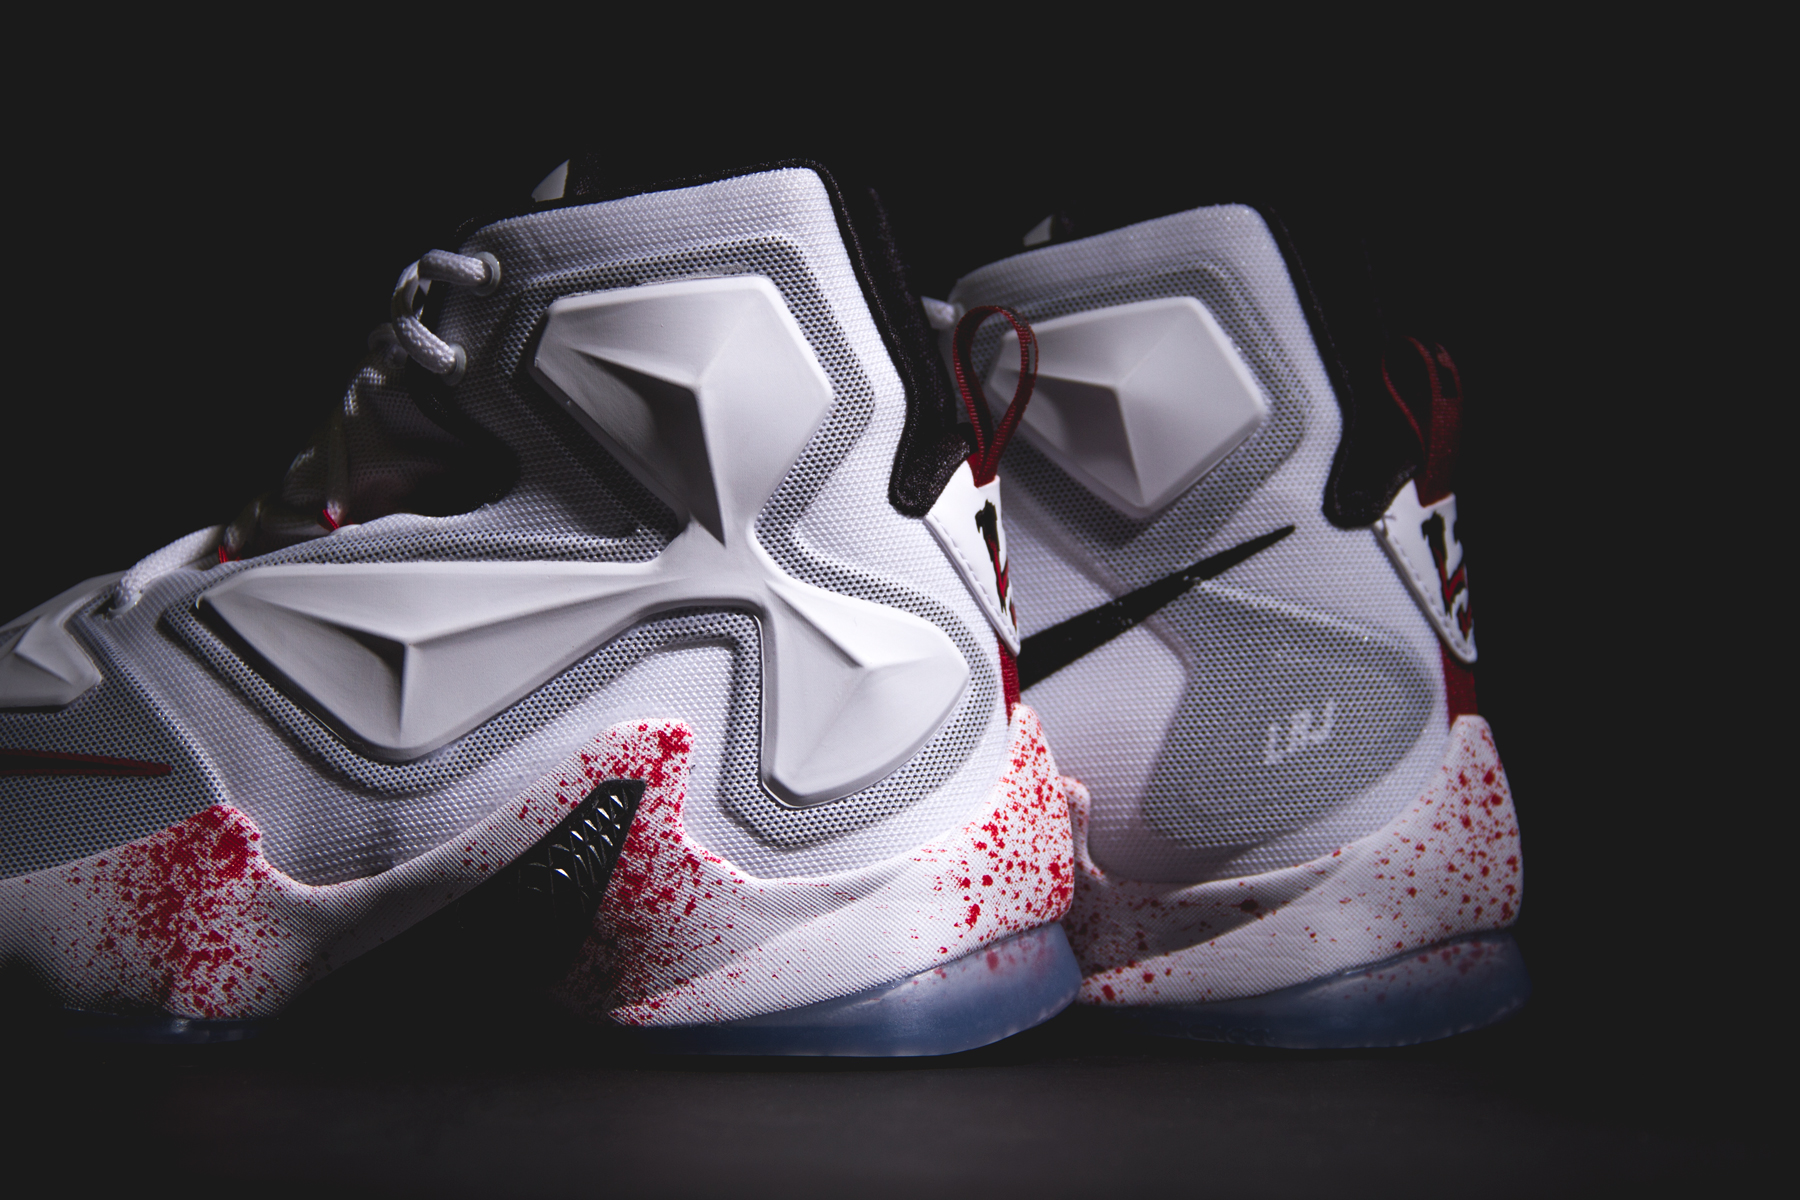 lebron 13 friday the 13th price